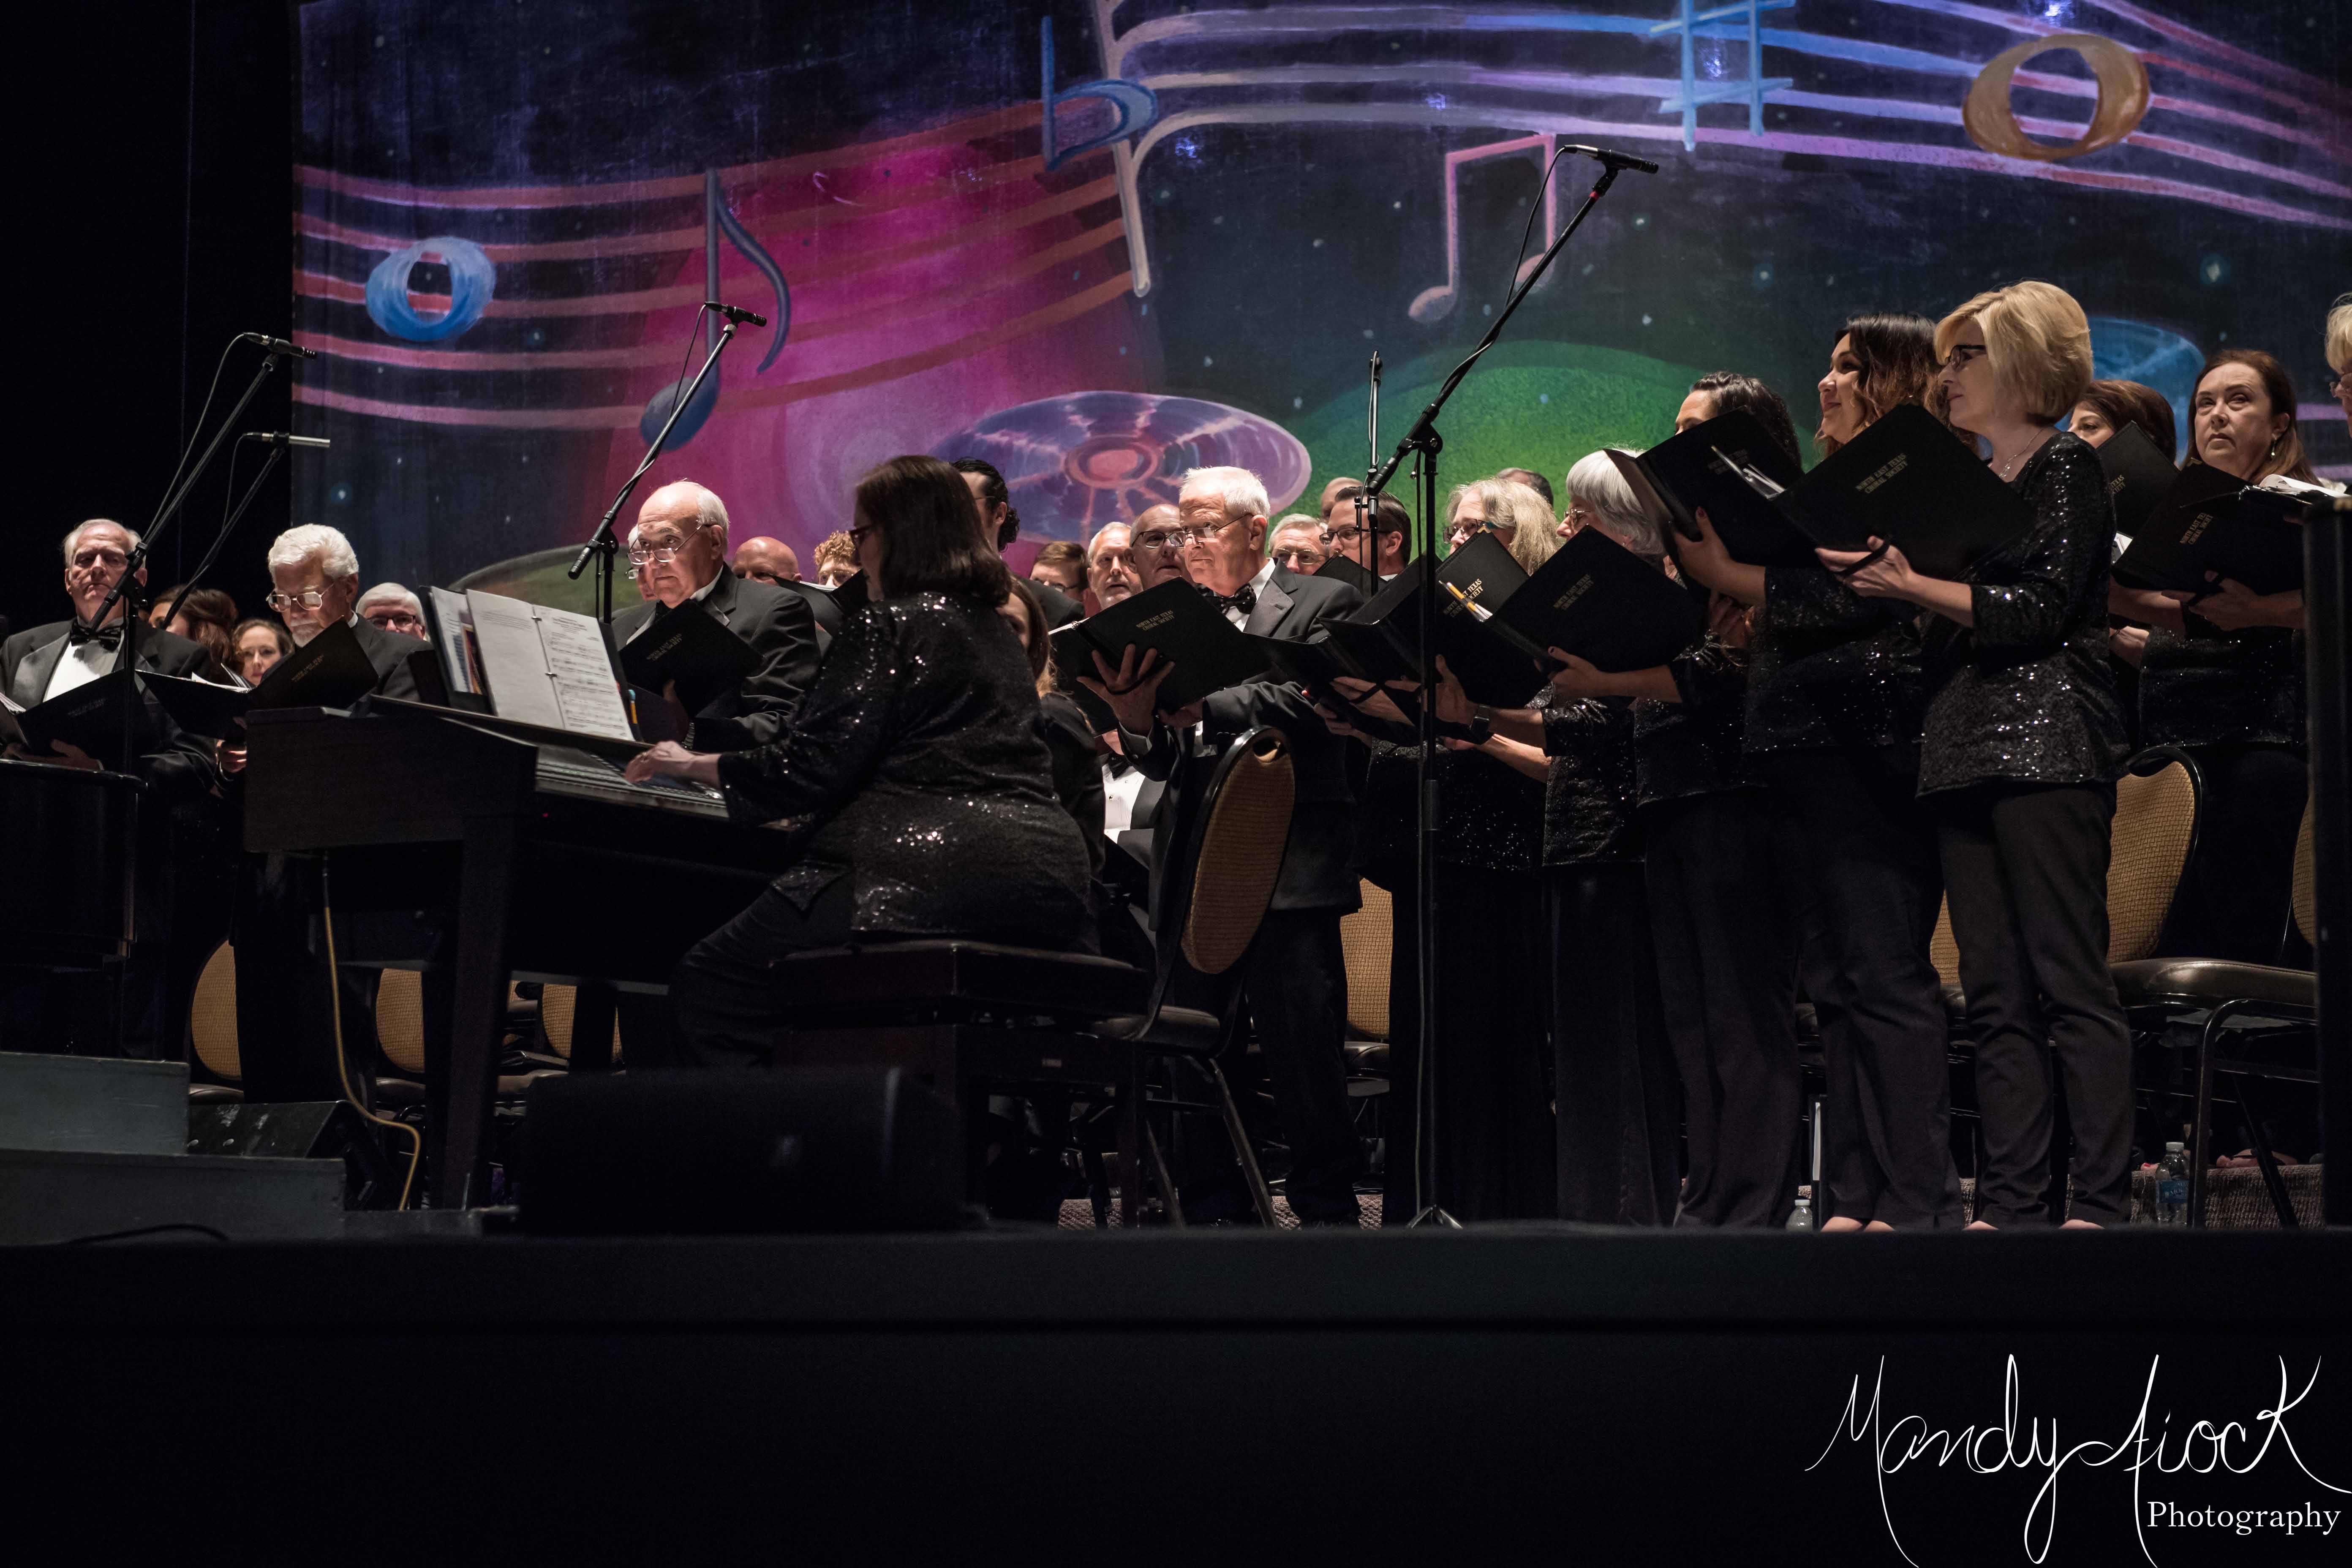 Photos from the North East Texas Choral Society’s Spring Concert by Mandy Fiock Photography!